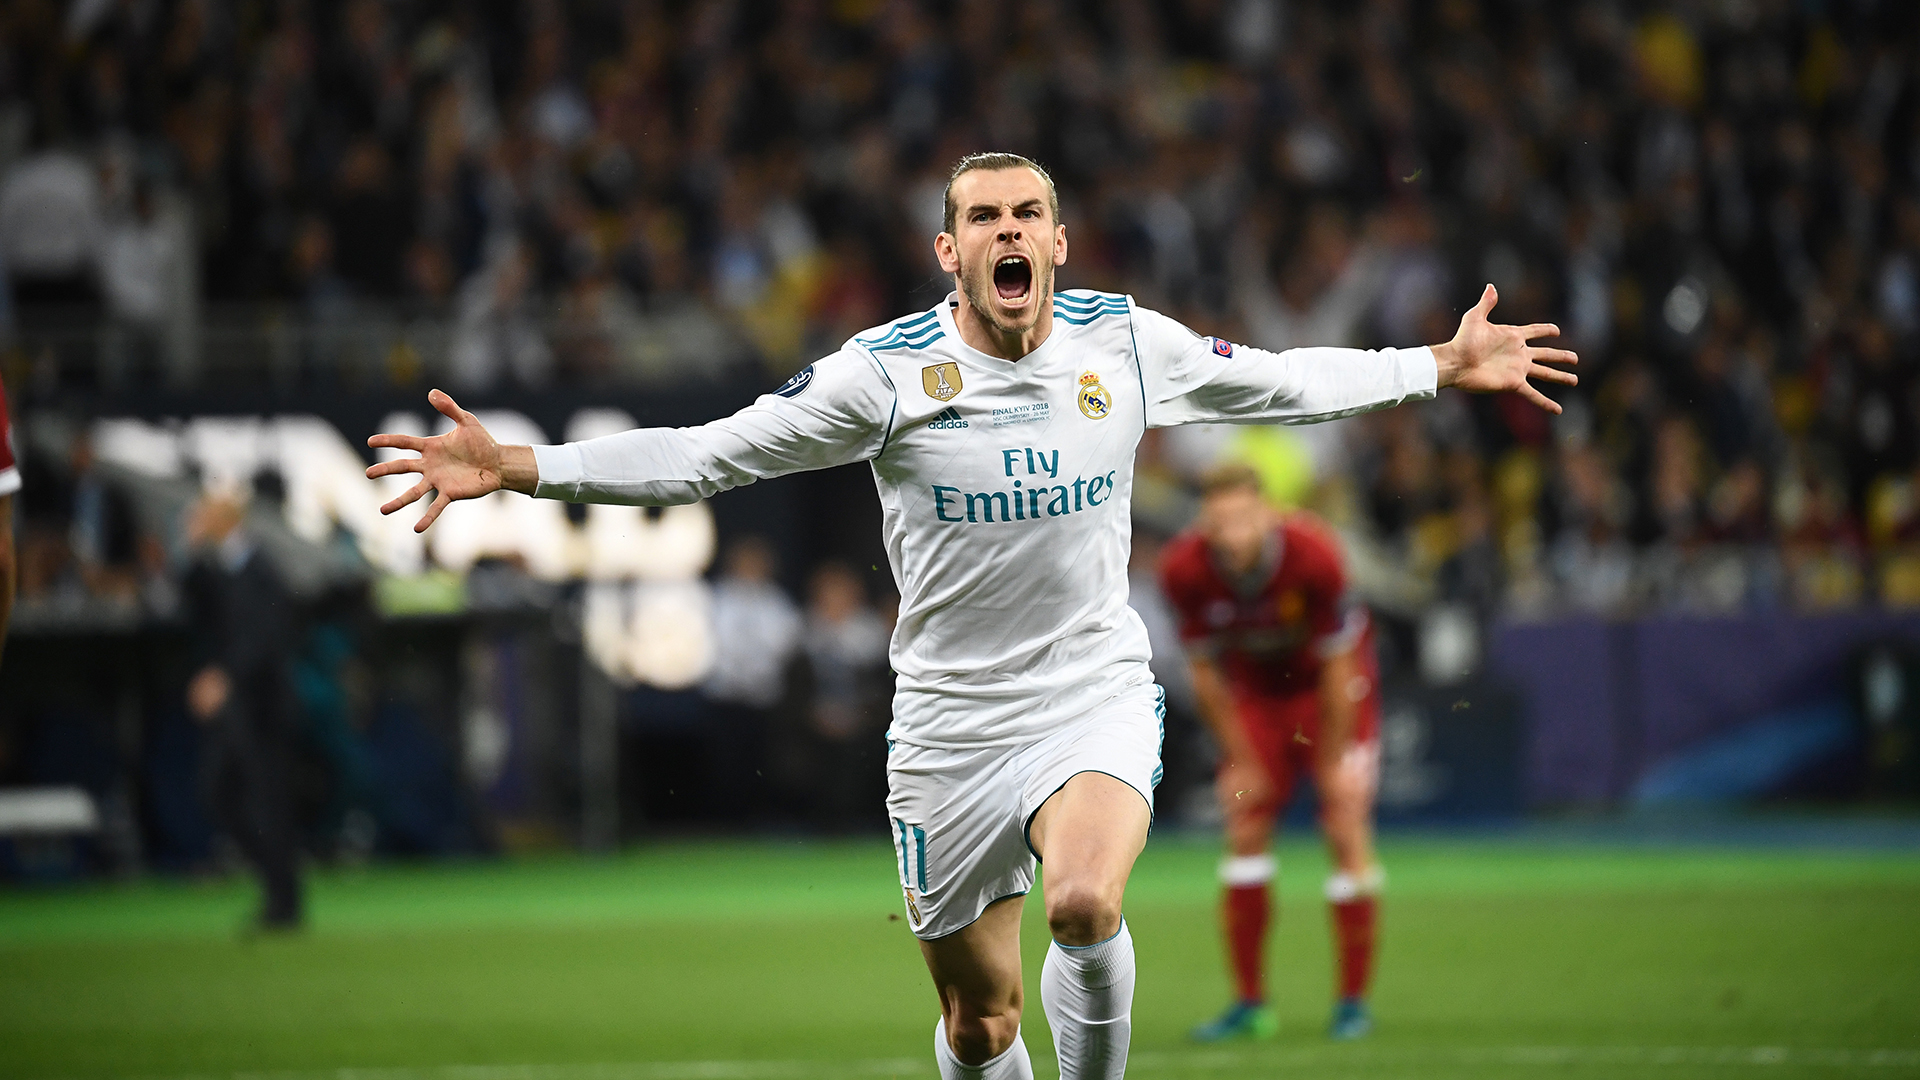 Real Madrid's Welsh forward Gareth Bale celebrates after scoring his team's second goal during the UEFA Champions League final football match between Liverpool and Real Madrid at the Olympic Stadium in Kiev, Ukraine, on May 26, 2018.